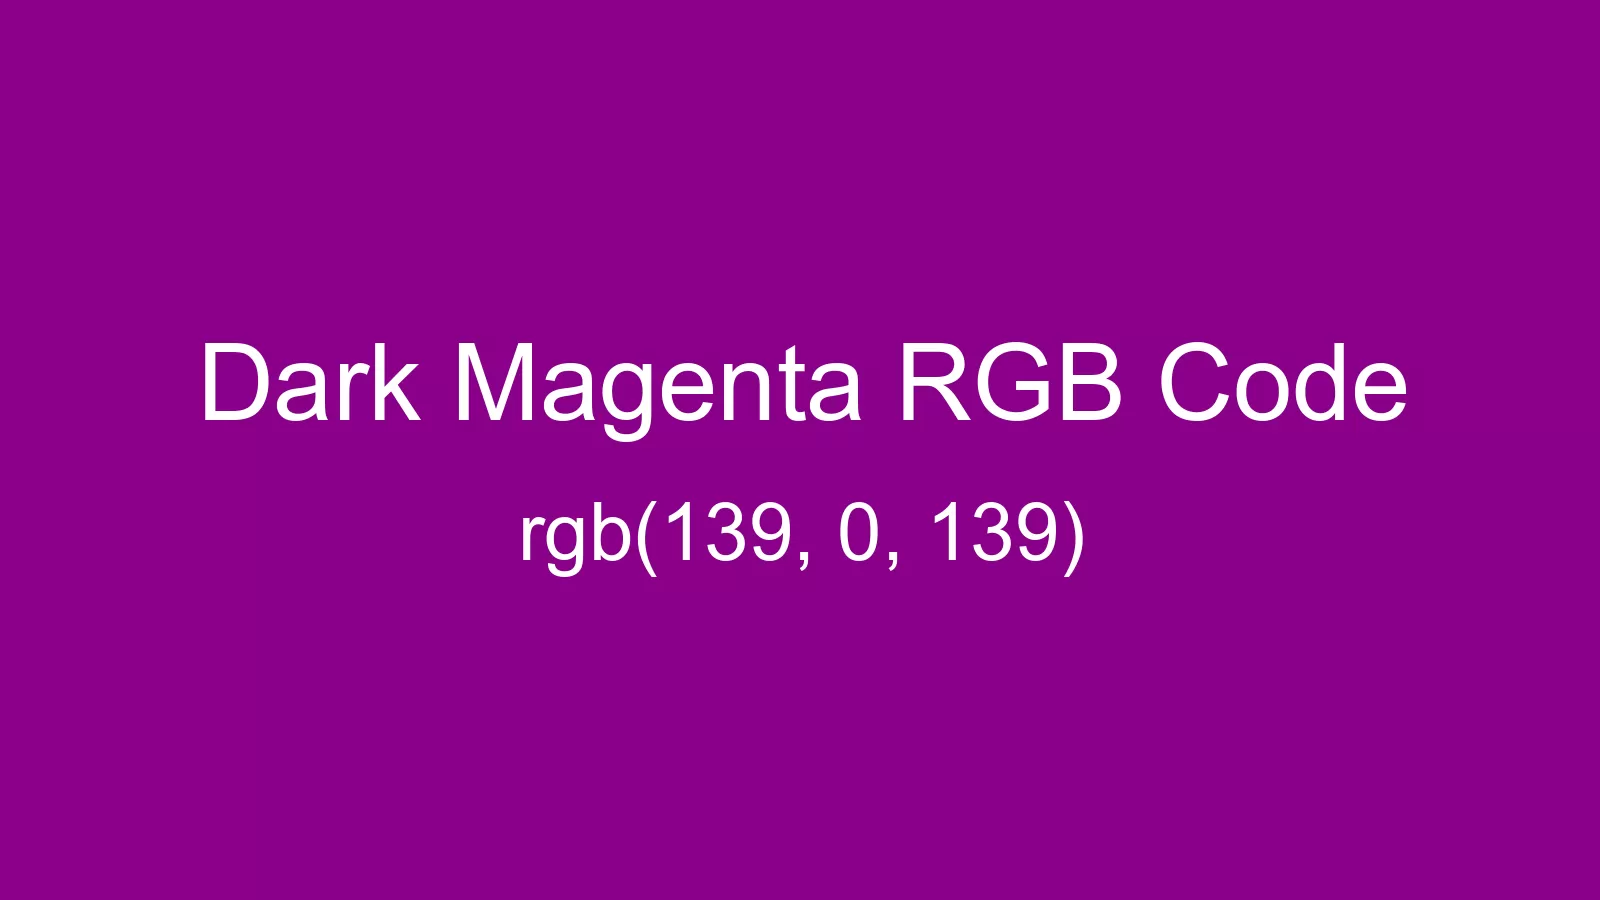 preview image of Dark Magenta color and RGB code